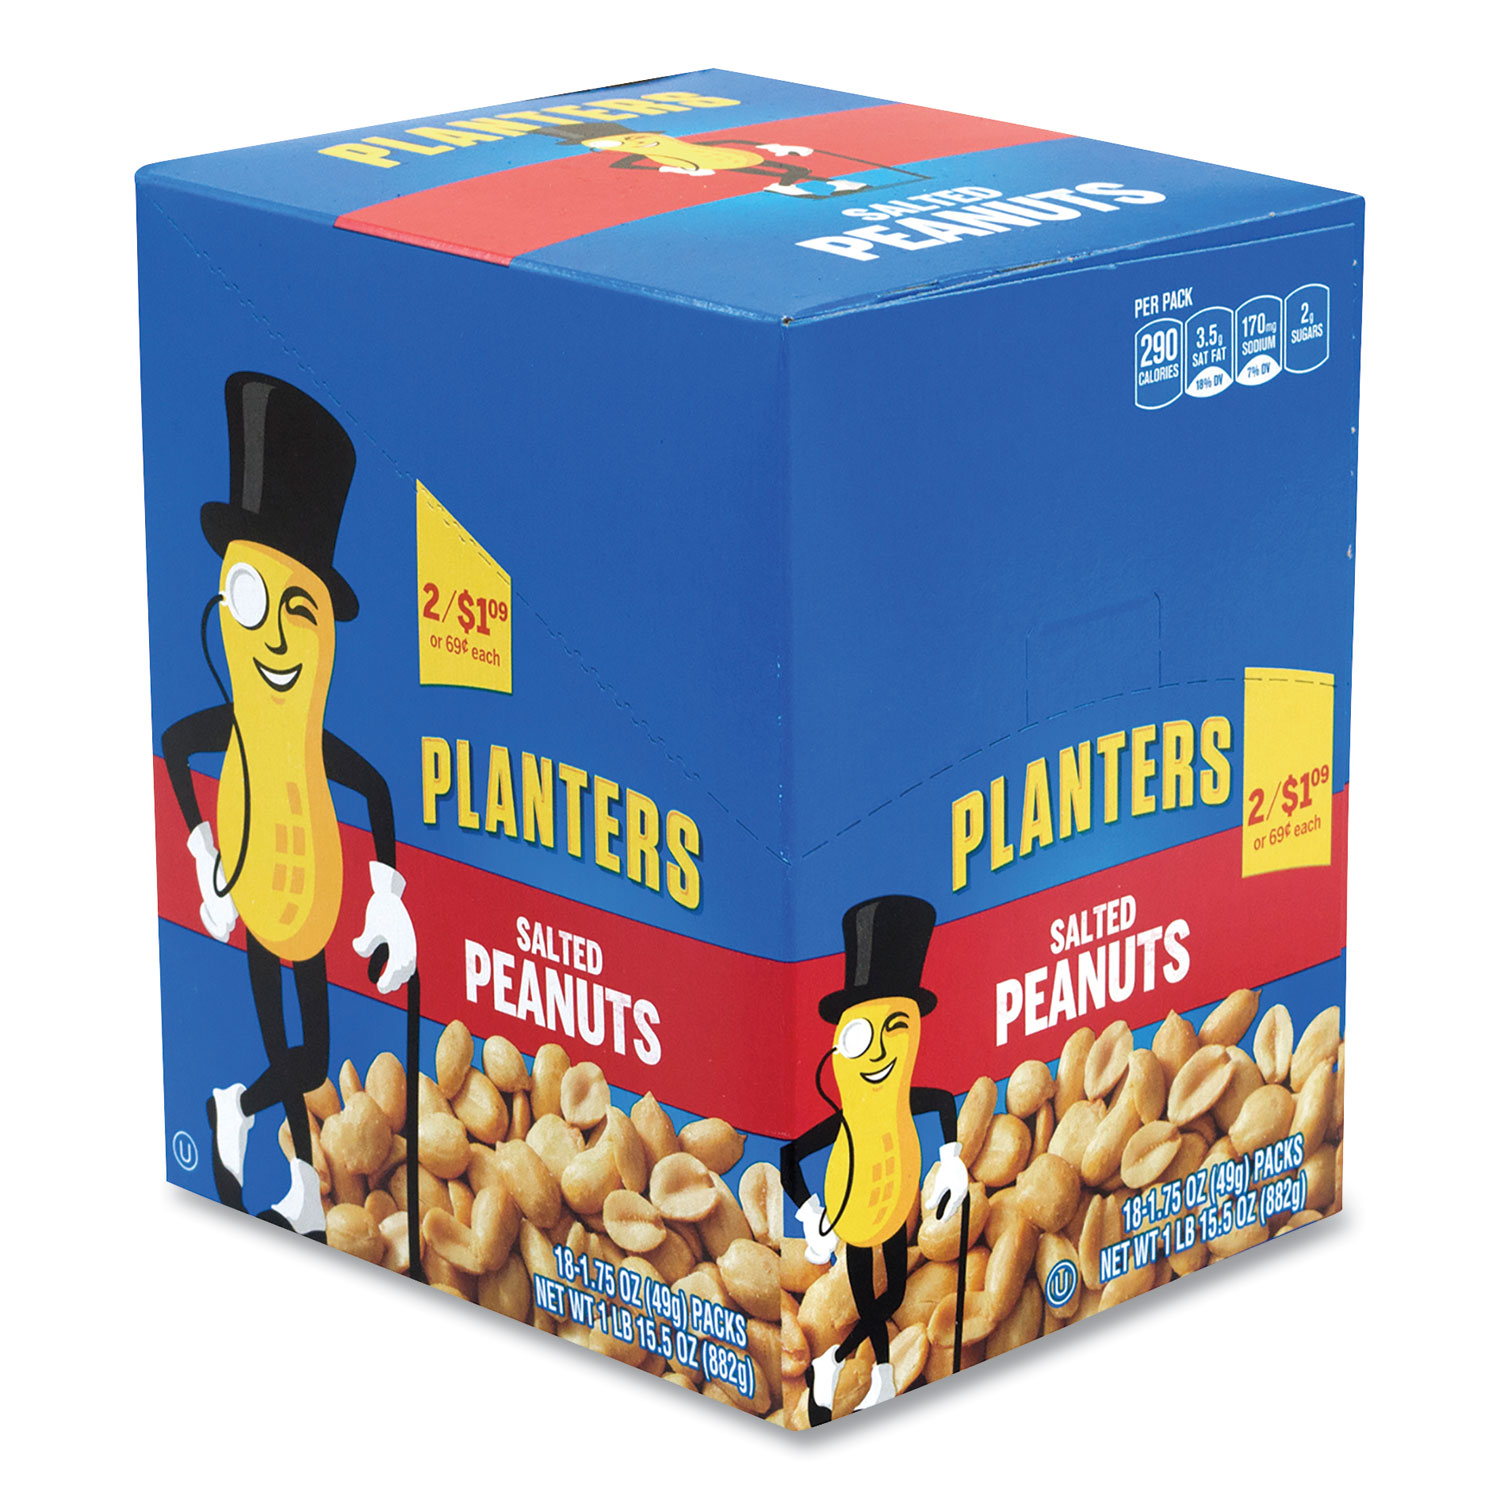  Planters 7569 Salted Peanuts, 1.75 oz Pack, 18 Packs/Box, Free Delivery in 1-4 Business Days (GRR20900627) 